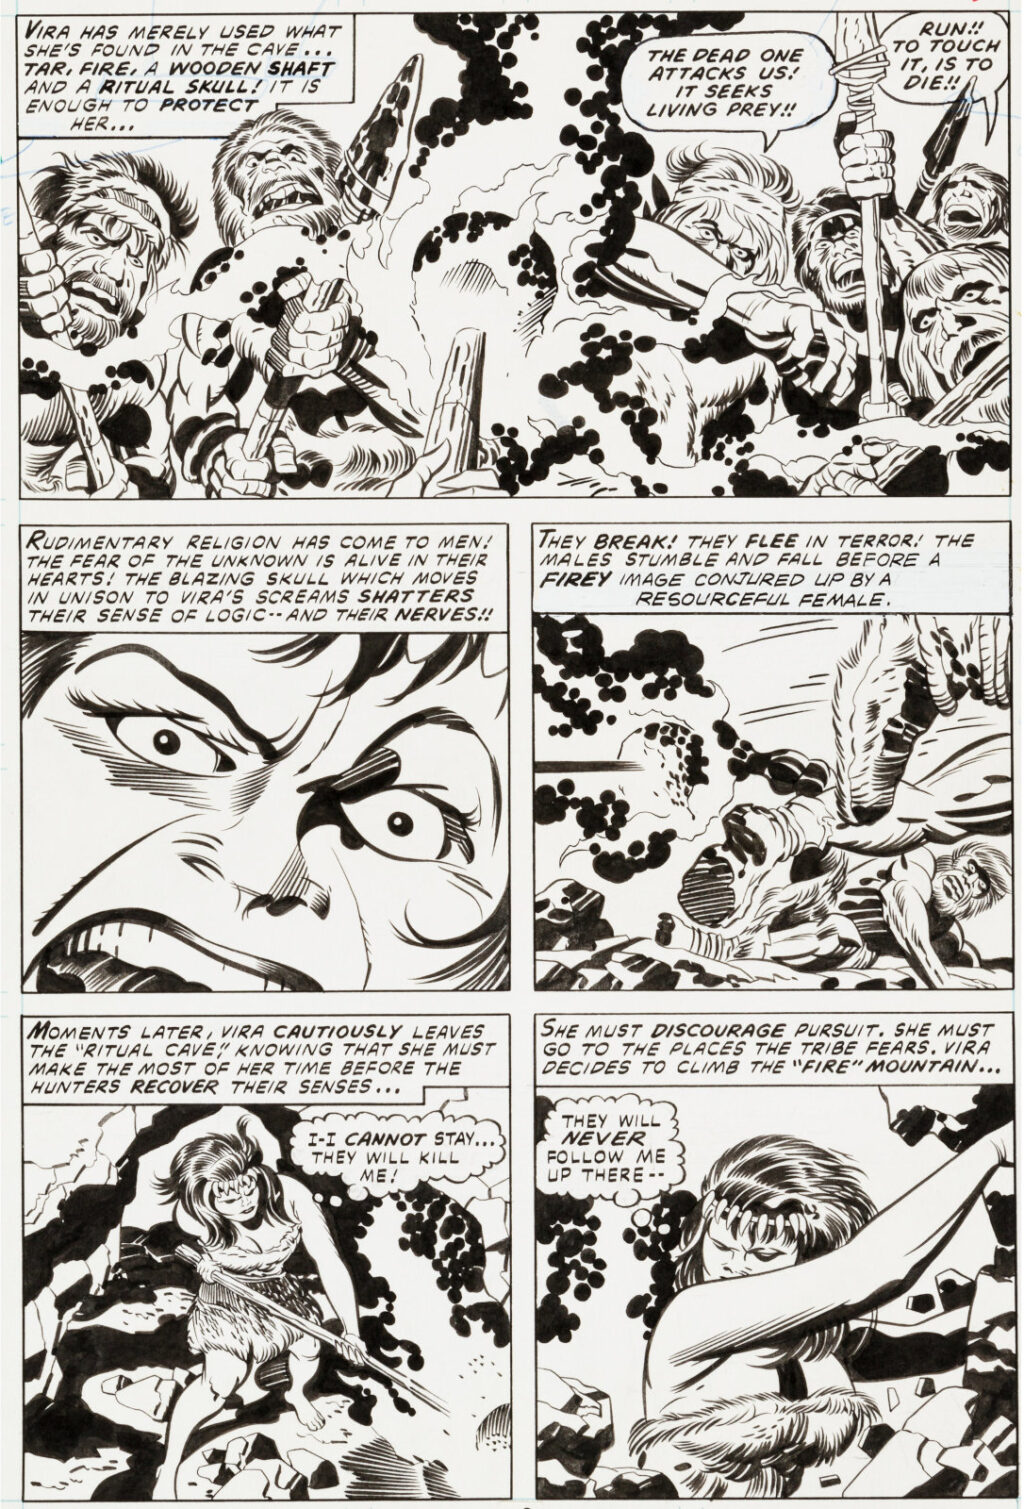 2001 A Space Odyssey issue 2 page 4 by Jack Kirby and Mike Royer